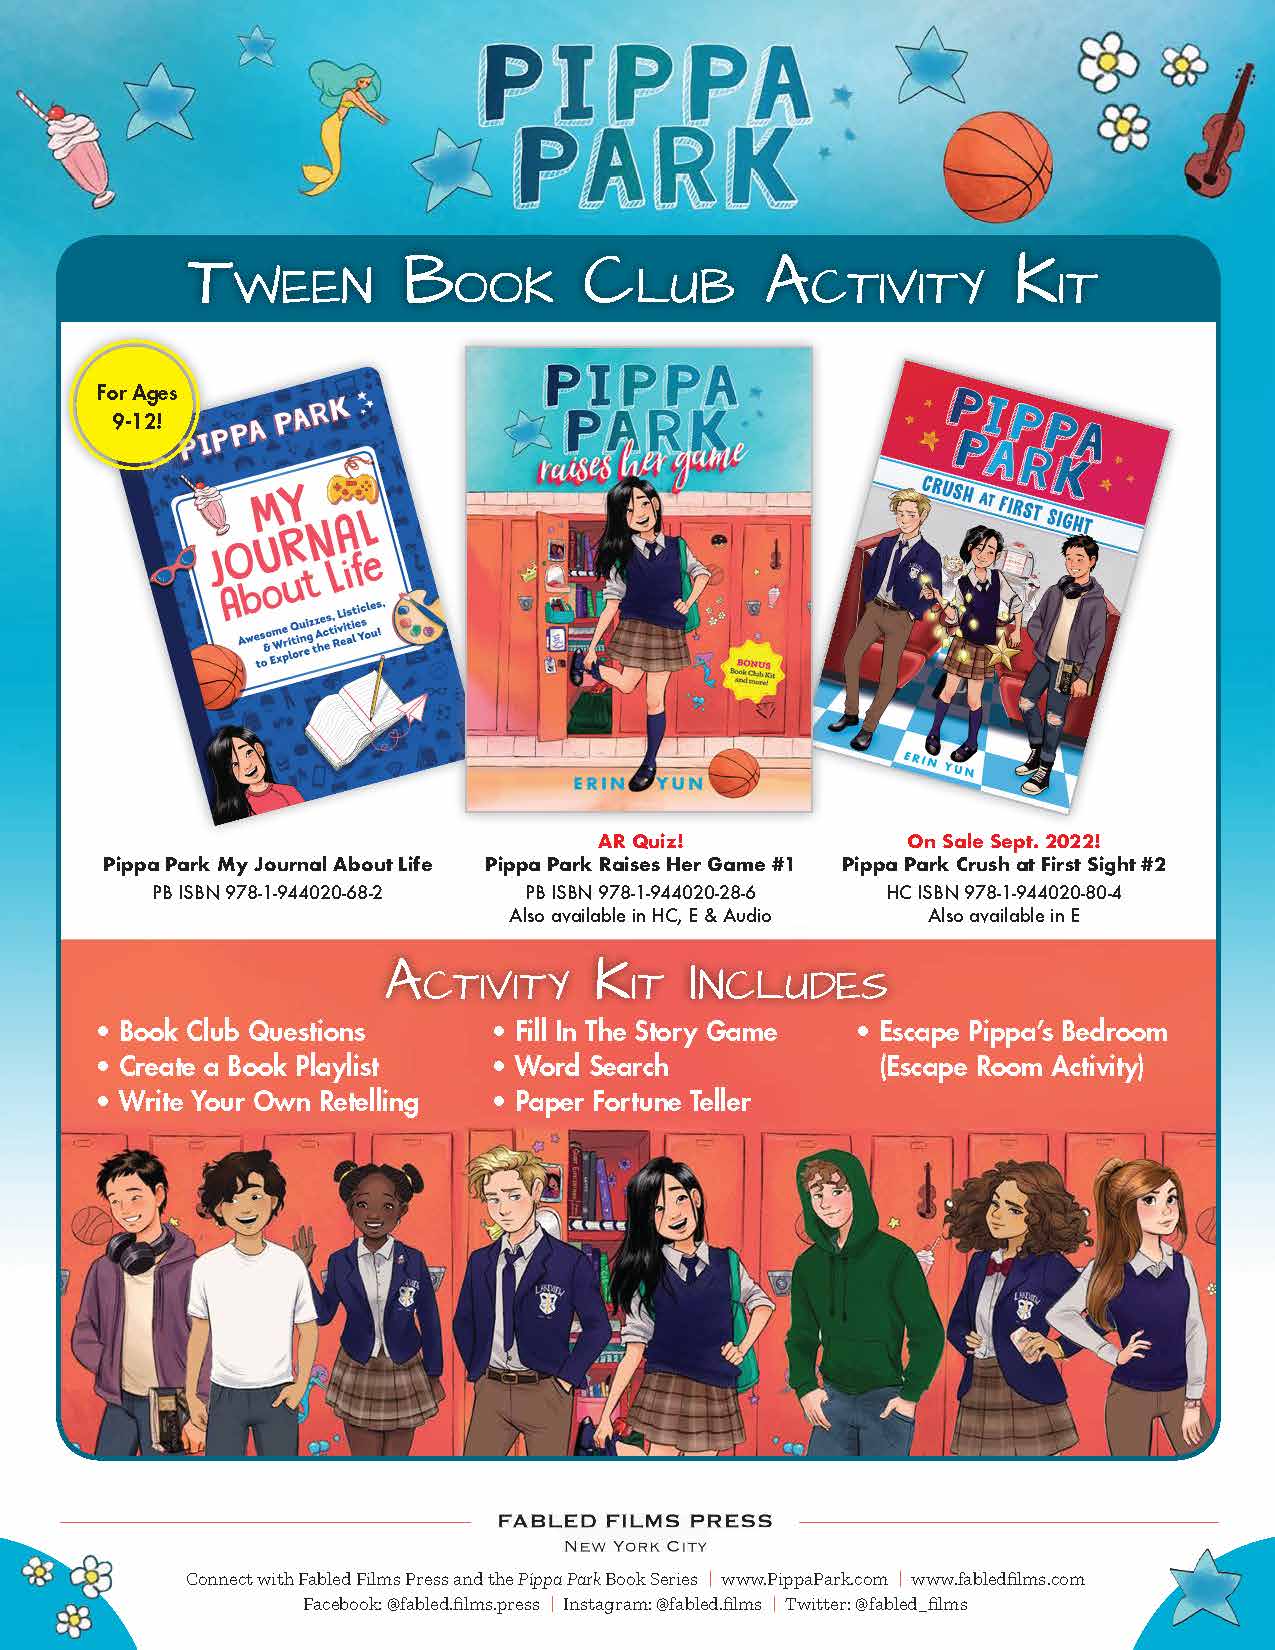 The Pippa Park Tween Book Club Activity Kit includes activities such as Book Club Questions, Word Games, and Crafts, where educators and parents can have tween readers interact more with the series.